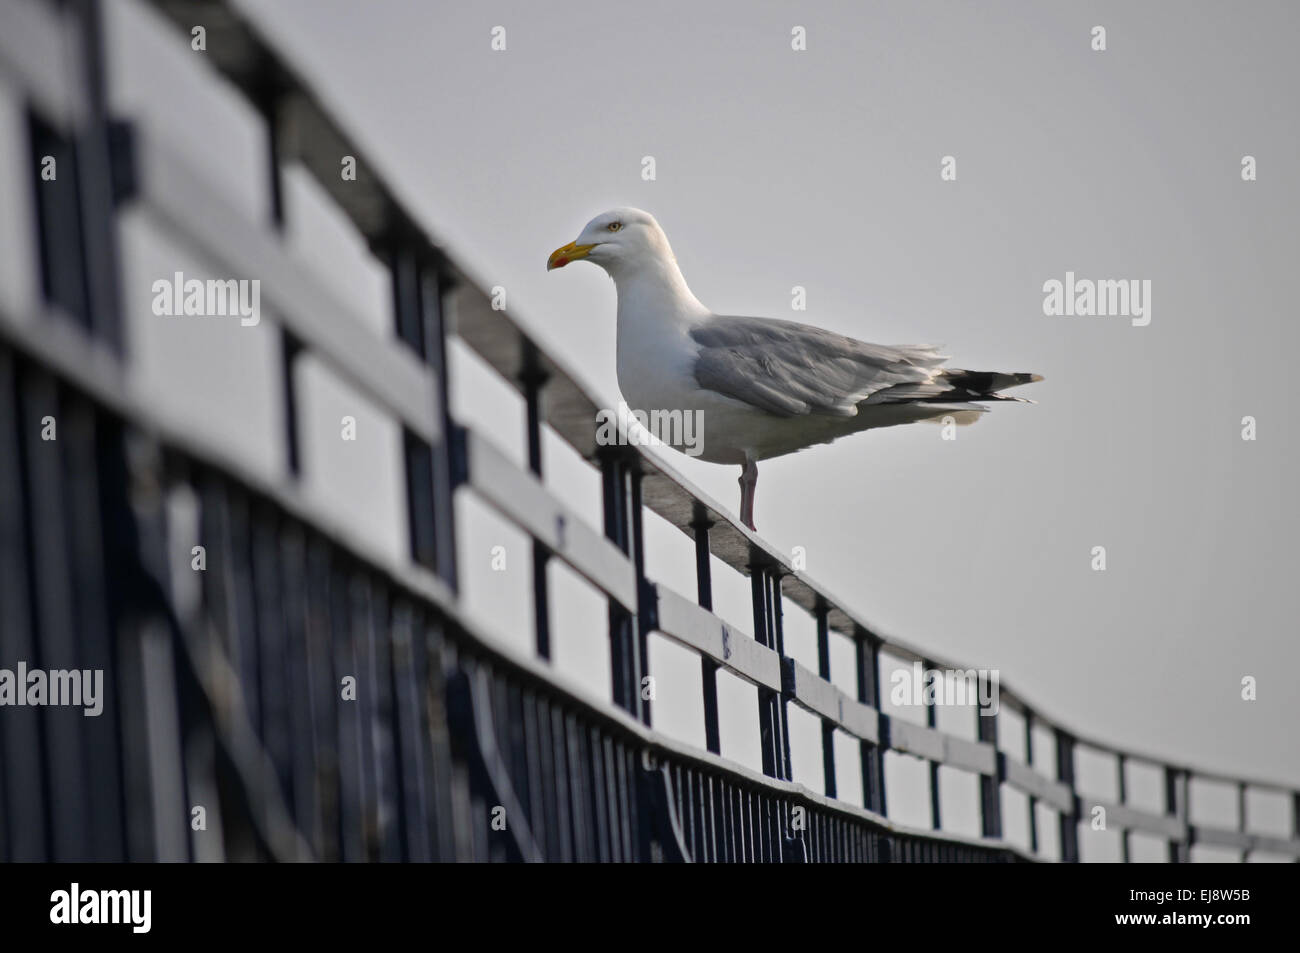 A seagull perched on railings in Falmouth Cornwall Stock Photo